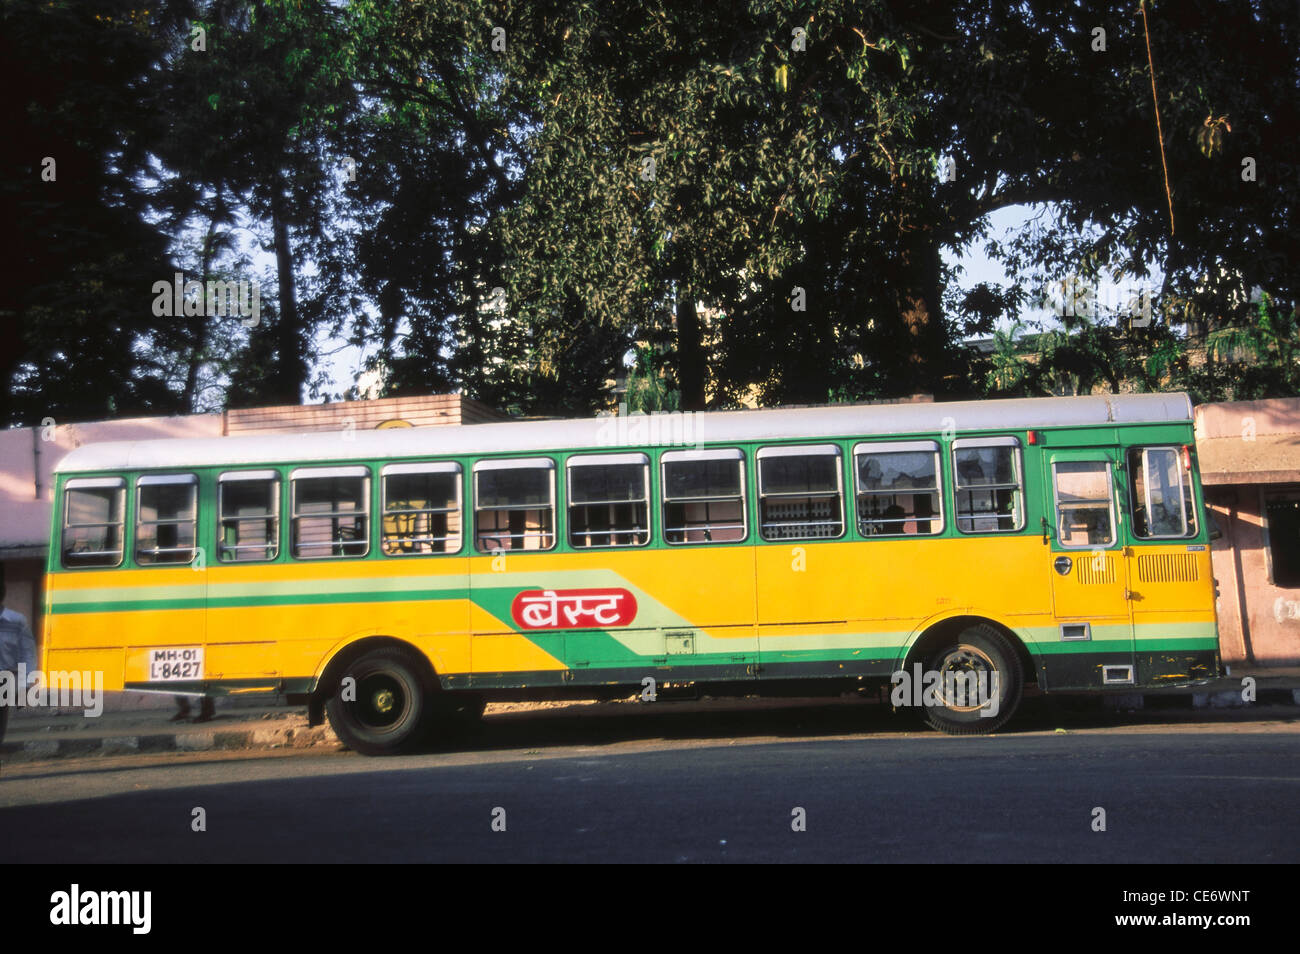 MBT 85374 : profile of yellow green painted BEST public transport bus Stock  Photo - Alamy